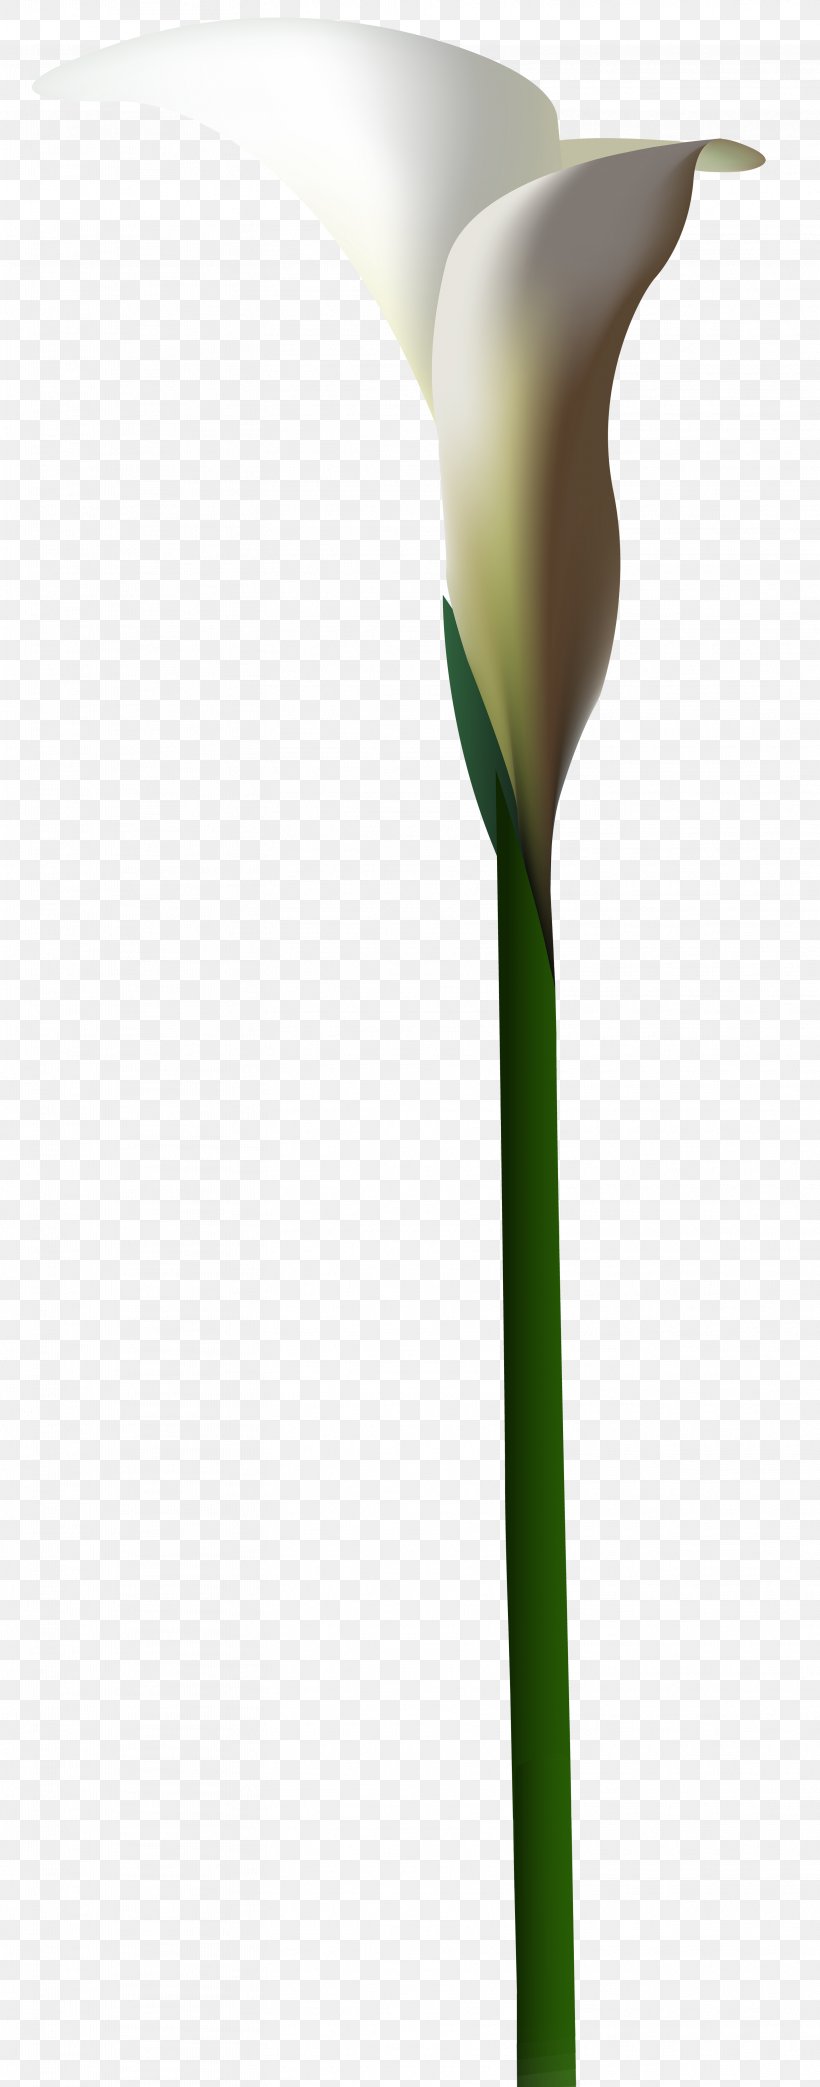 Calla Lily Flower Clip Art, PNG, 3143x8000px, Calla Lily, Alismatales, Arum, Arum Family, Arum Lilies Download Free